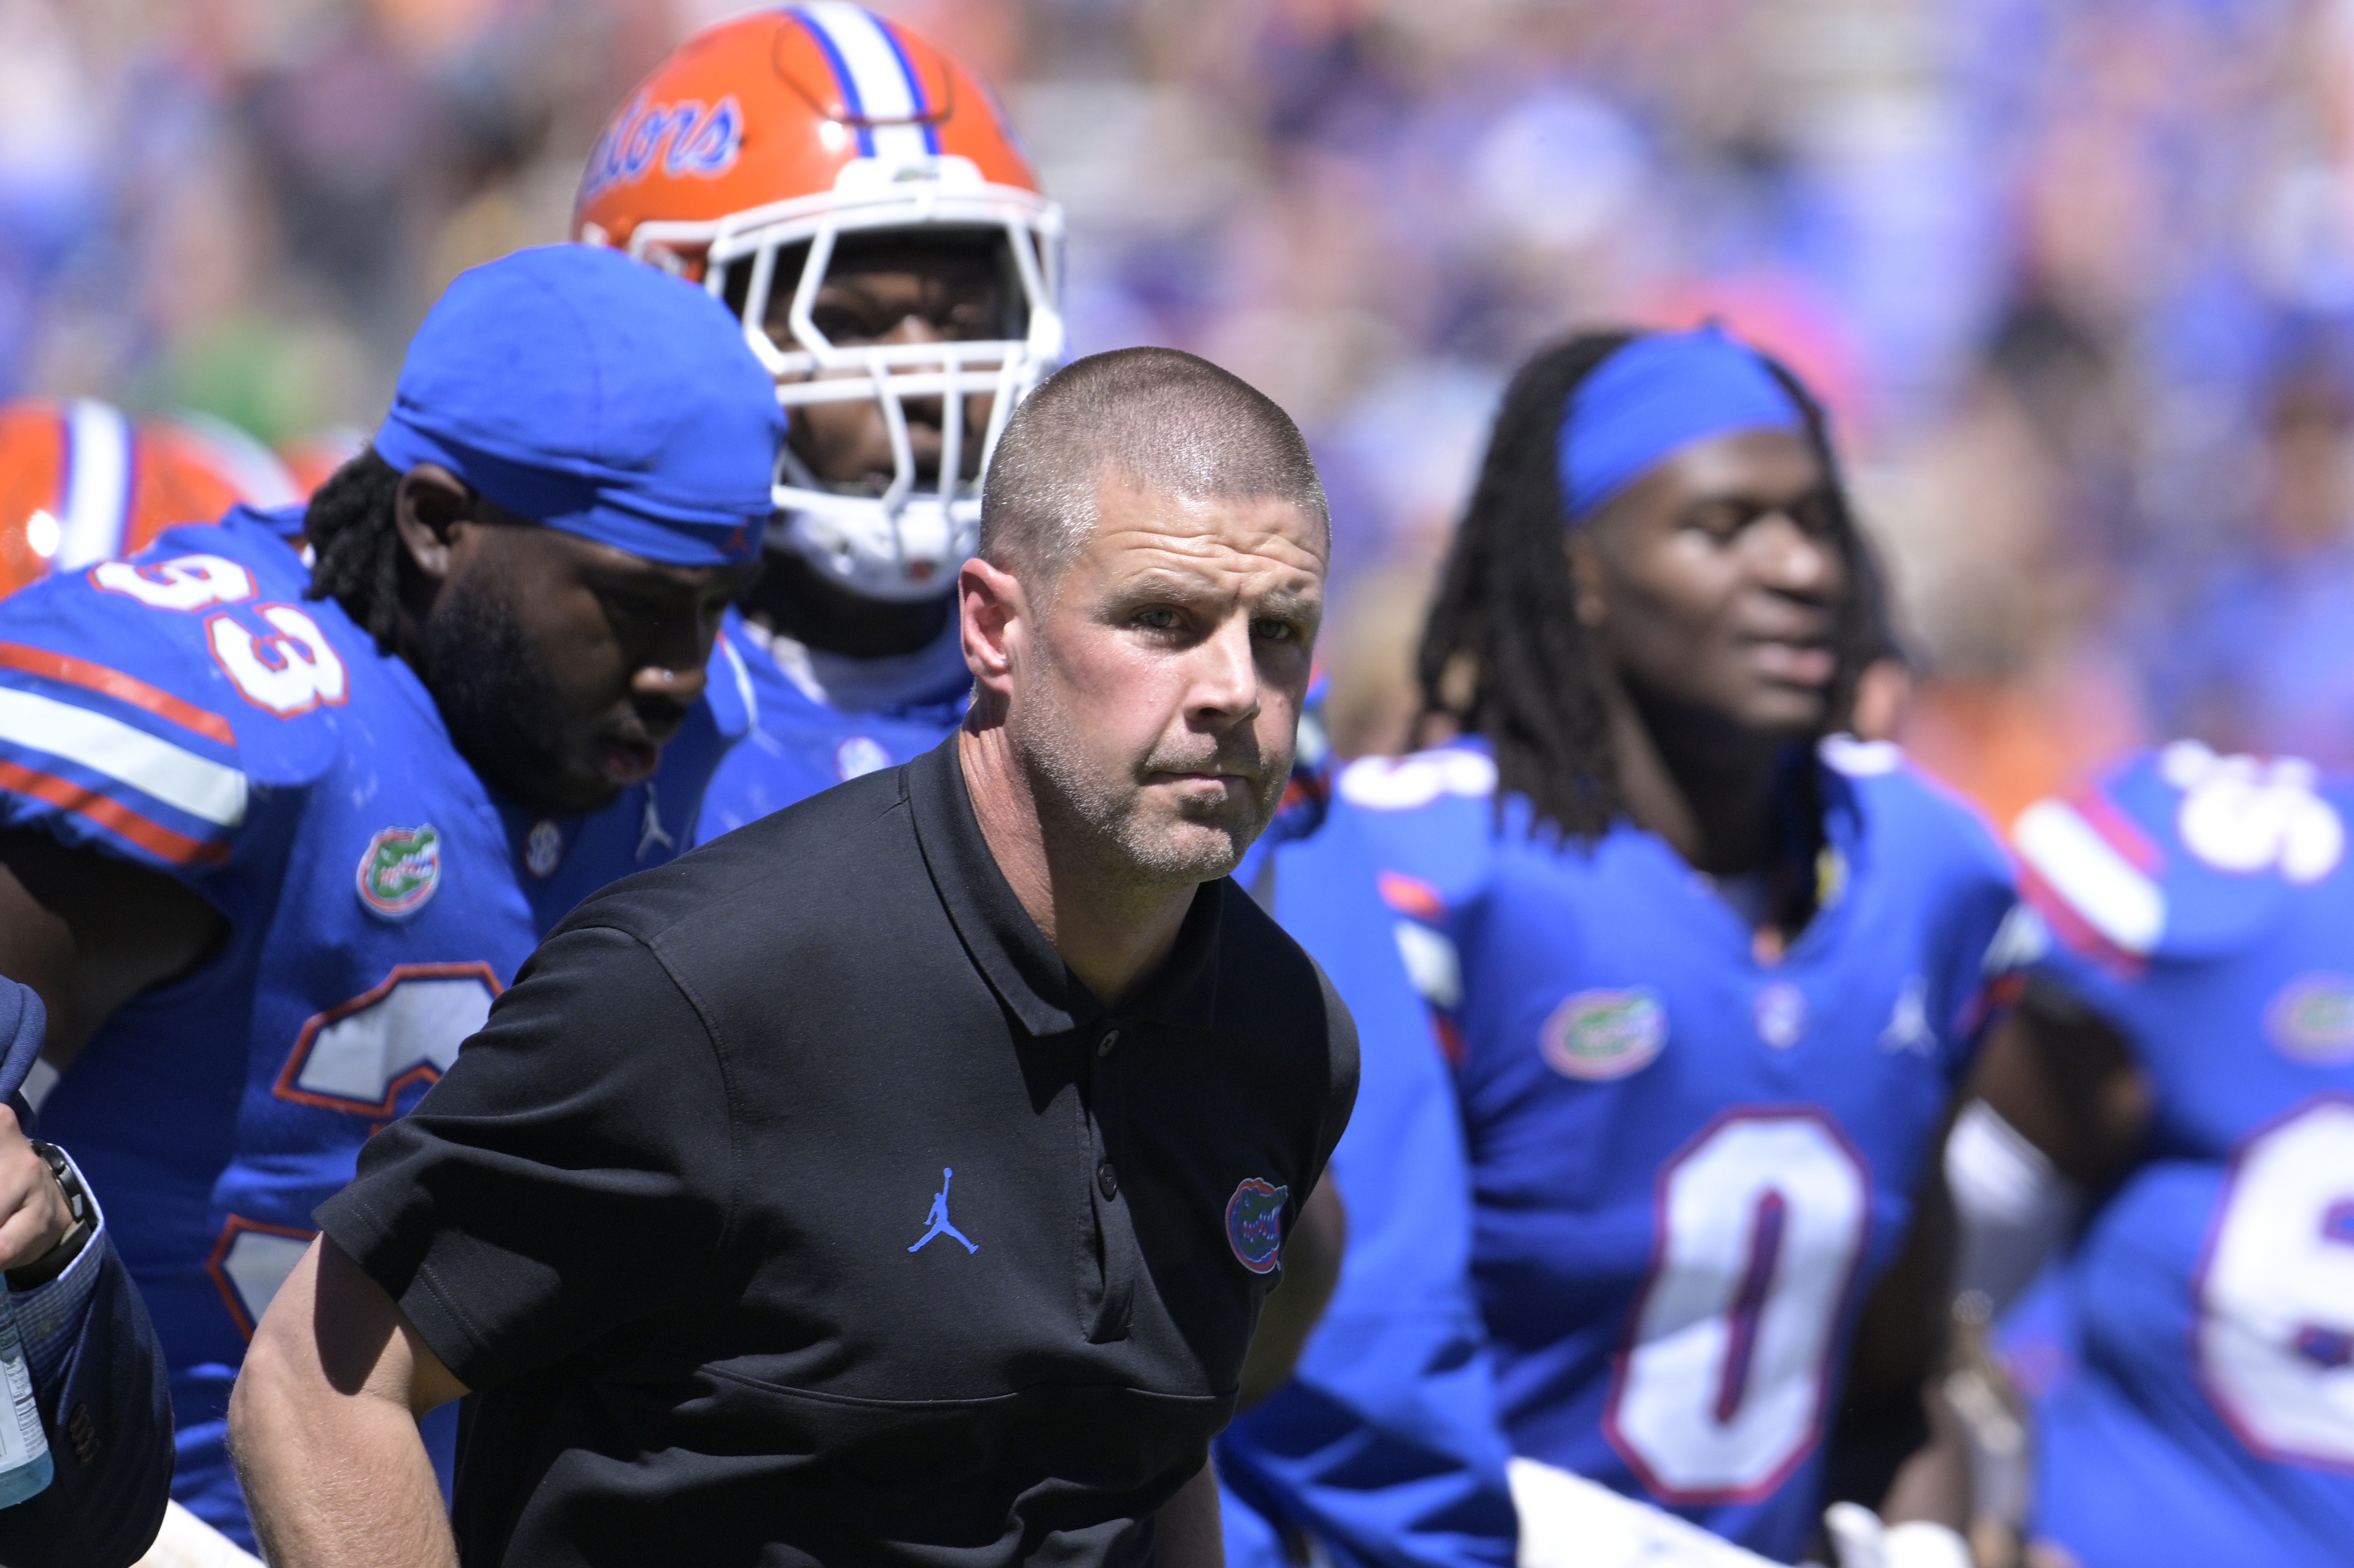 Florida Gators Football - Our 2022 uniform schedule is here